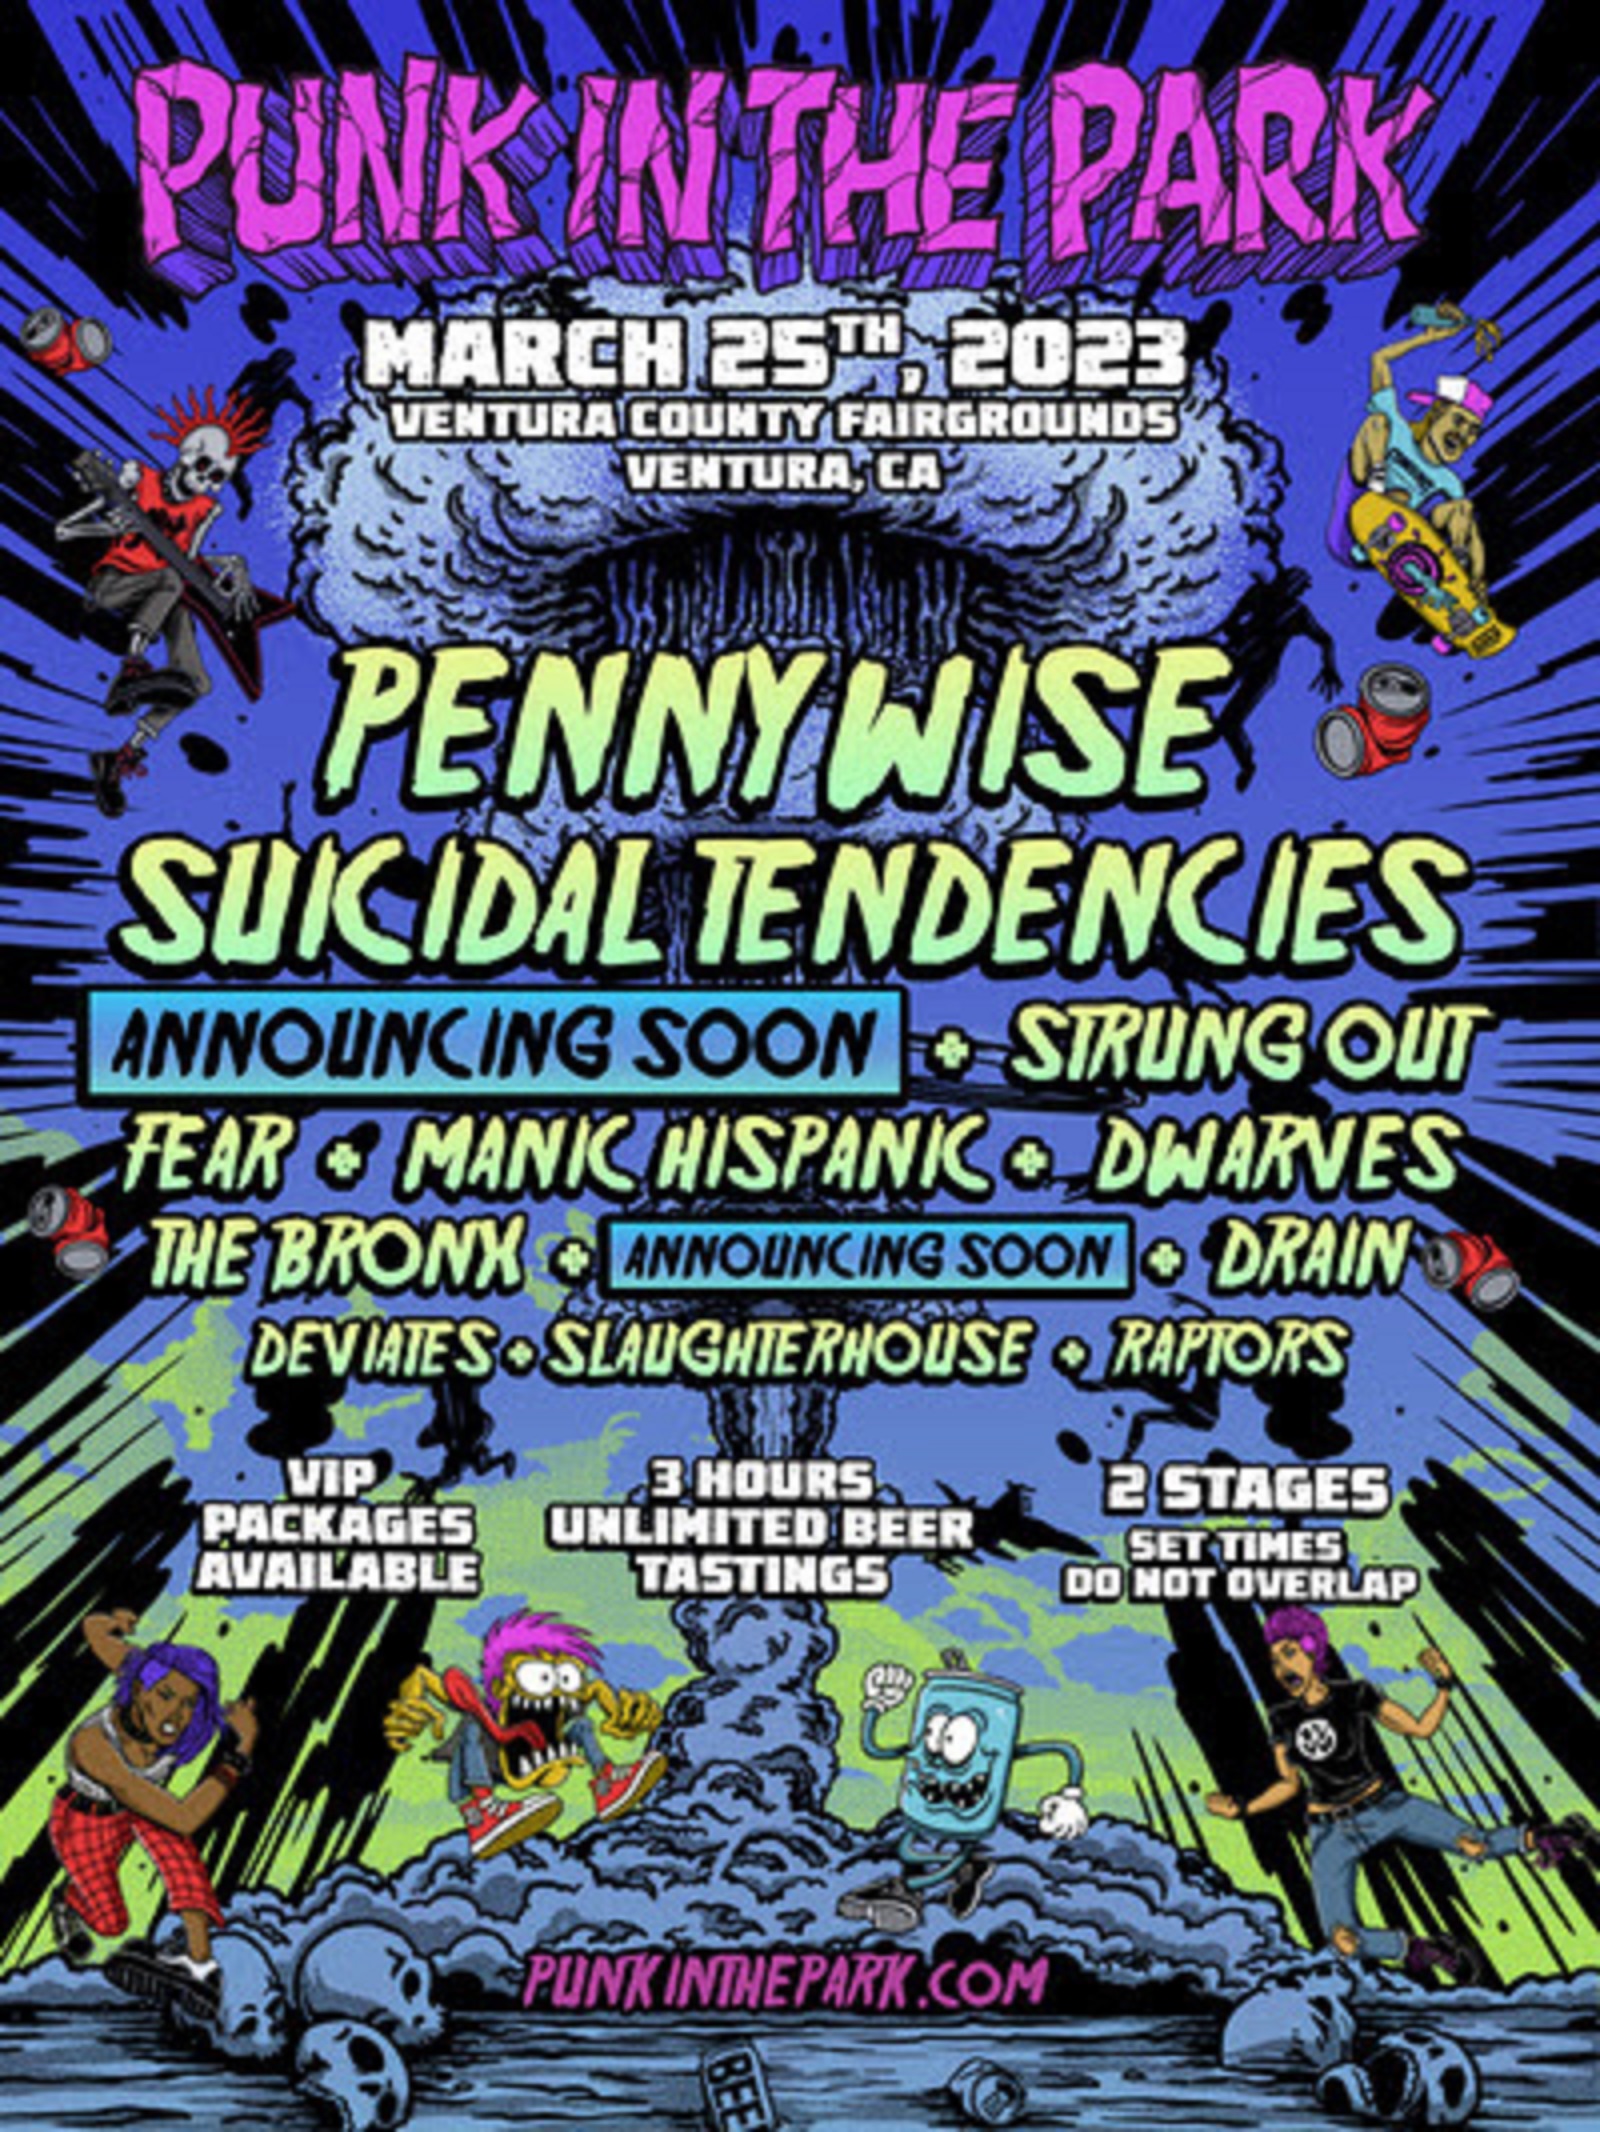 Punk In The Park Ventura - Pennywise, Suicidal Tendencies, Strung Out, Fear & More With Craft Beer Tasting March 25 In Ventura, CA